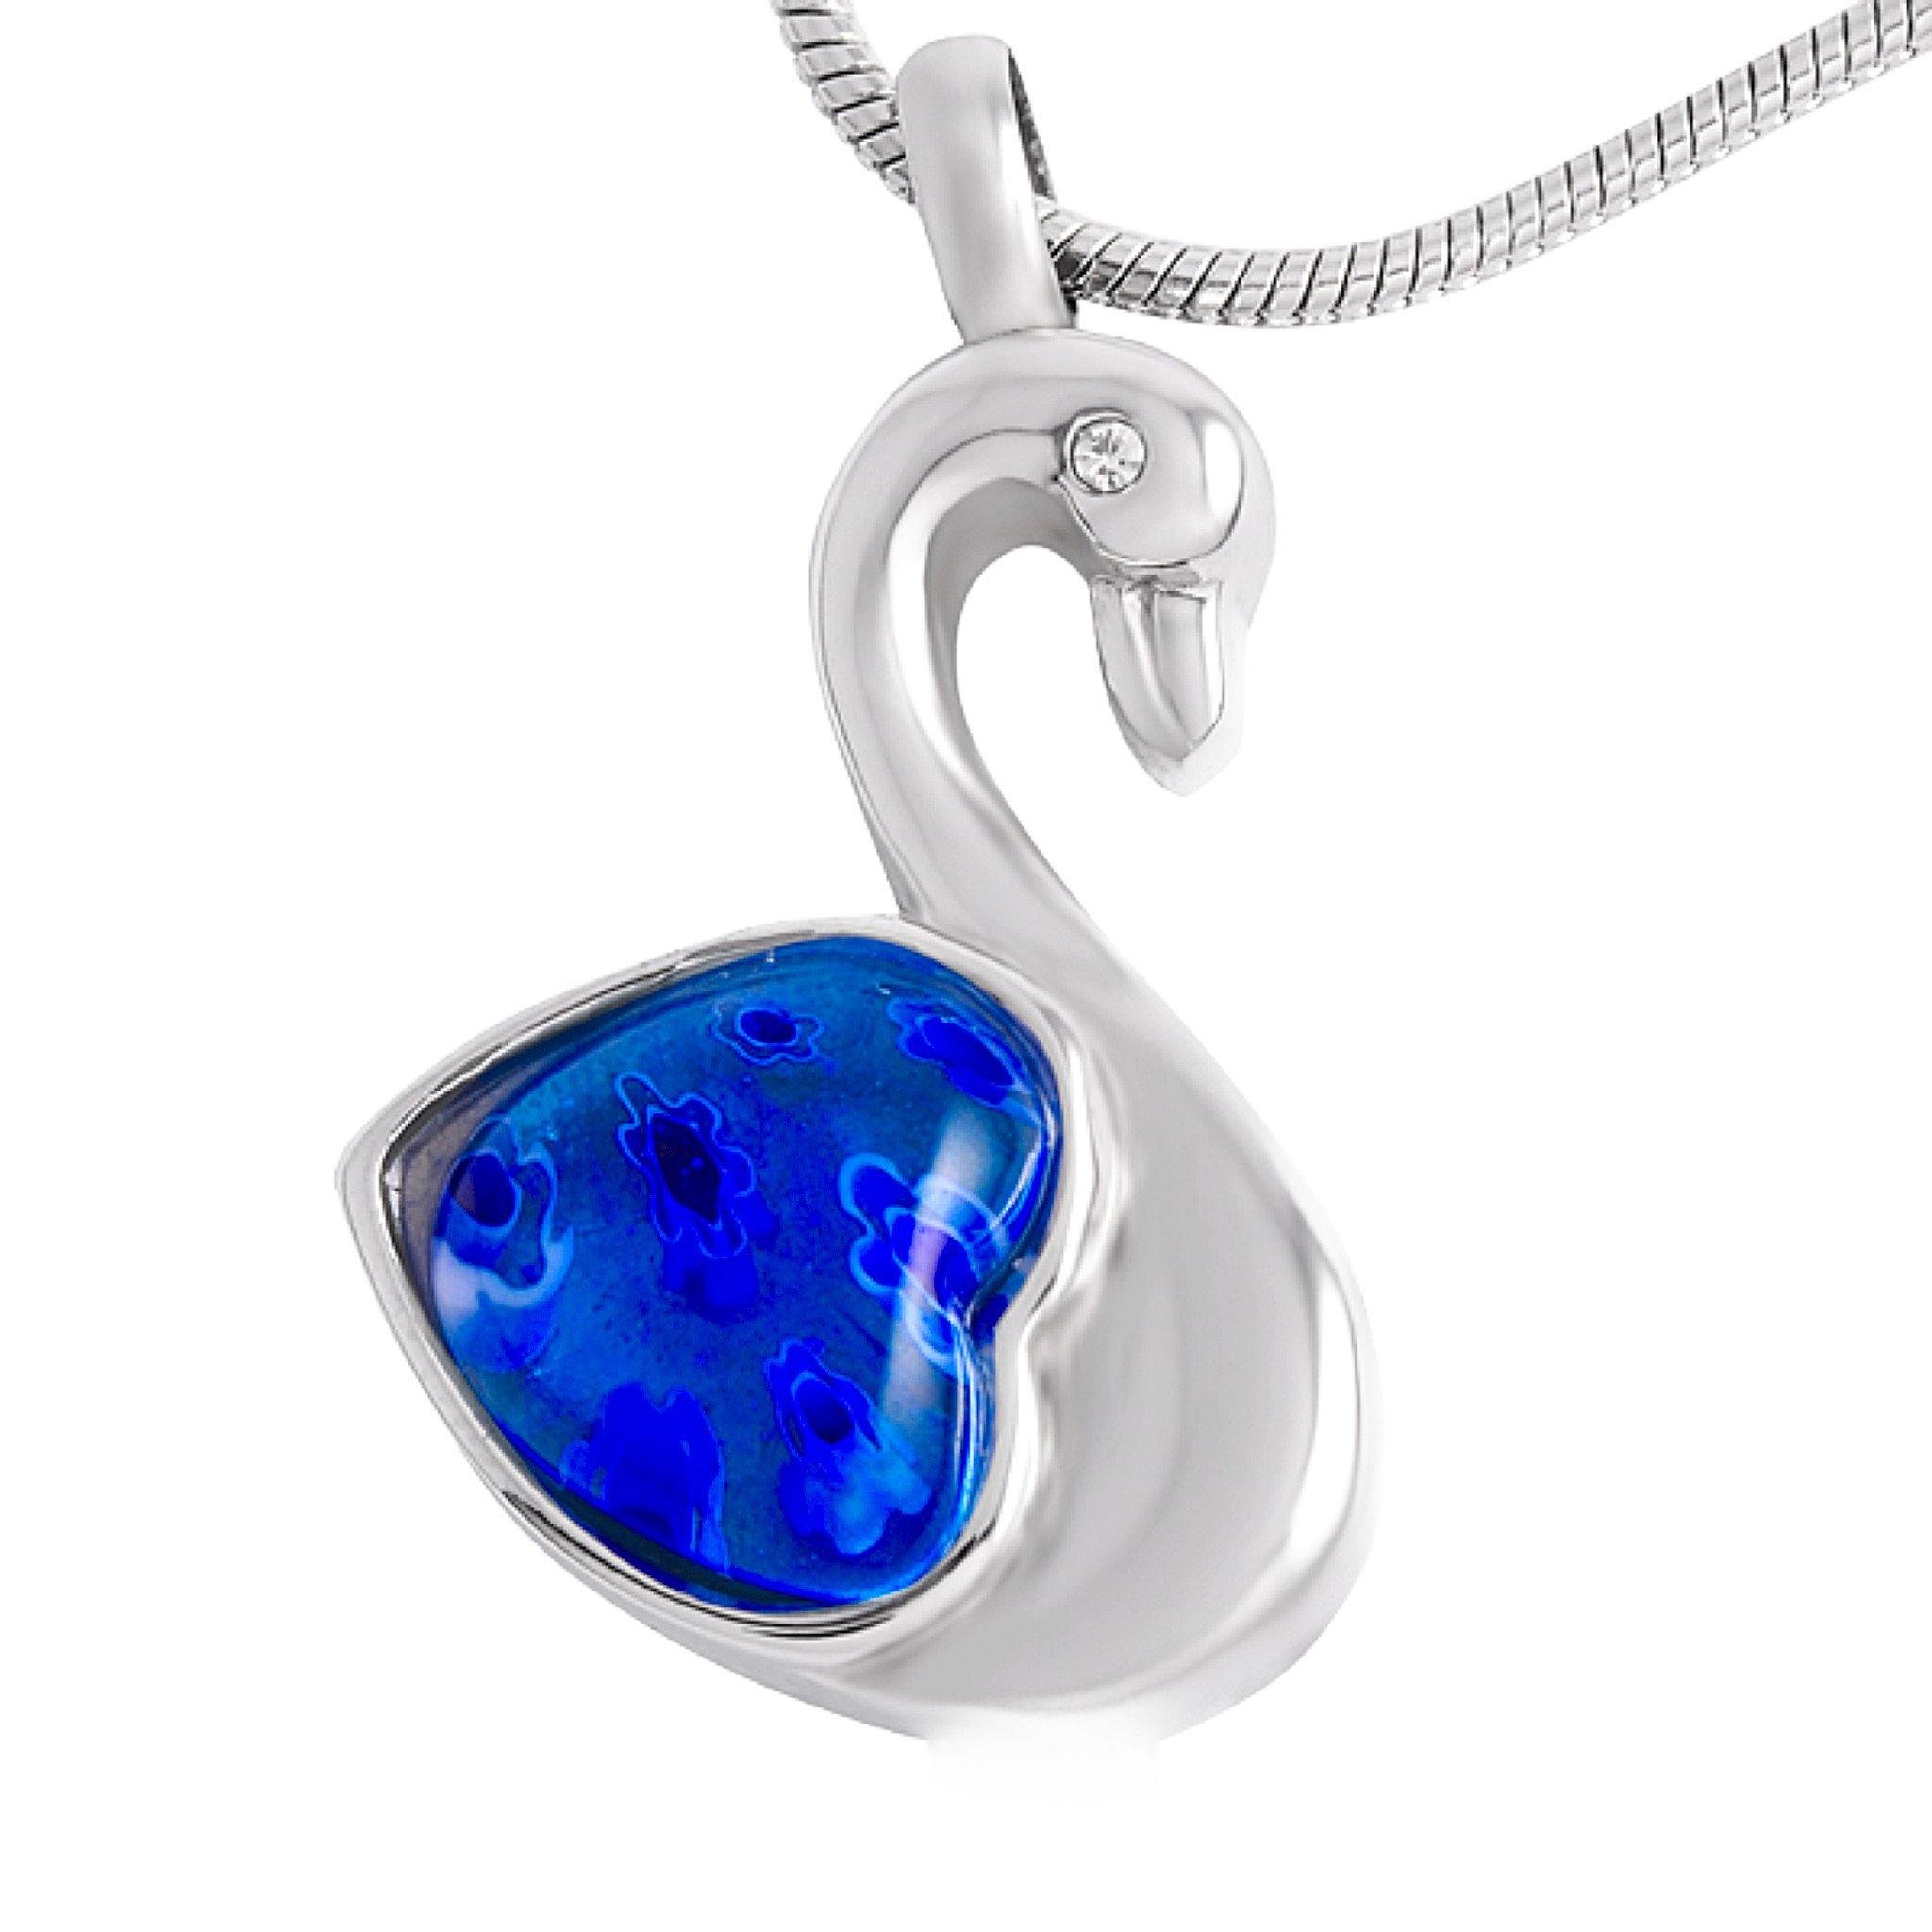 Swan with Blue Heart Cremation Ashes Pendant Design 67 Urns UK